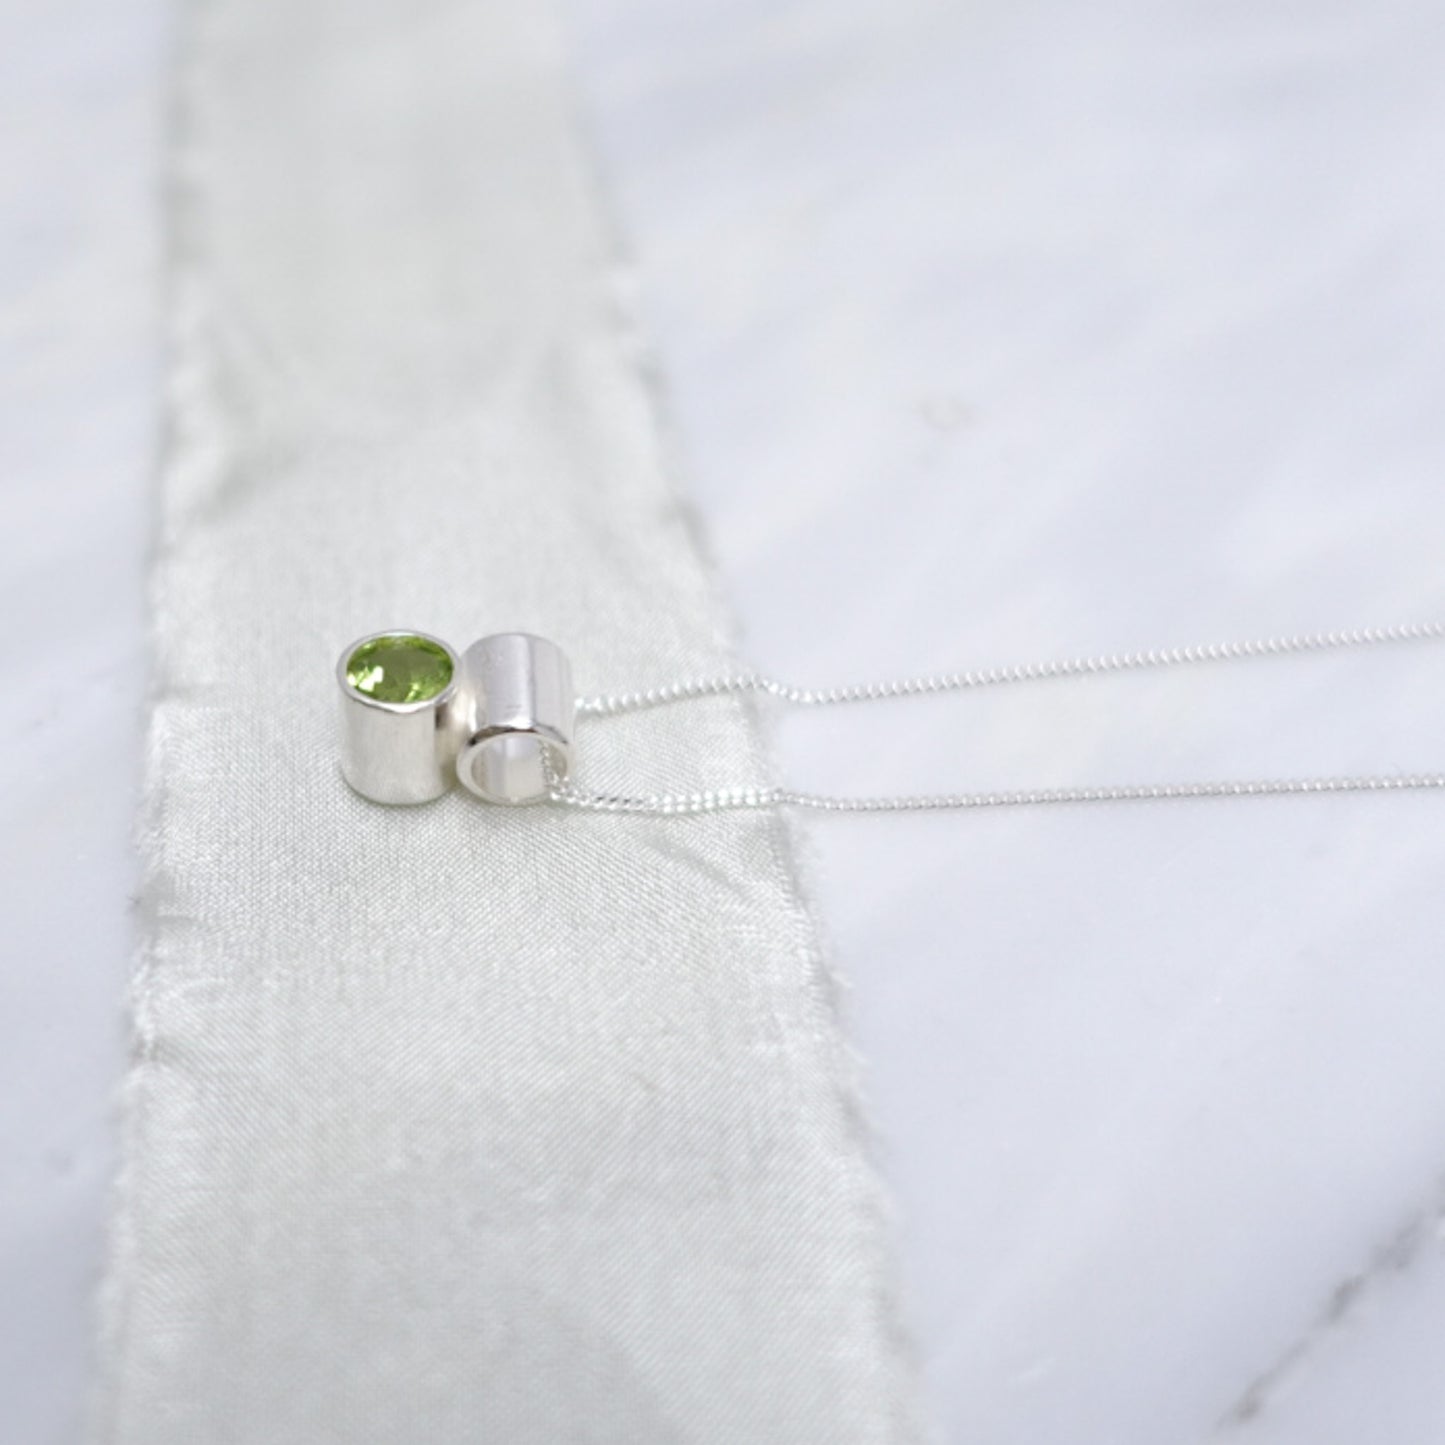 'New Opportunities' Peridot Necklace